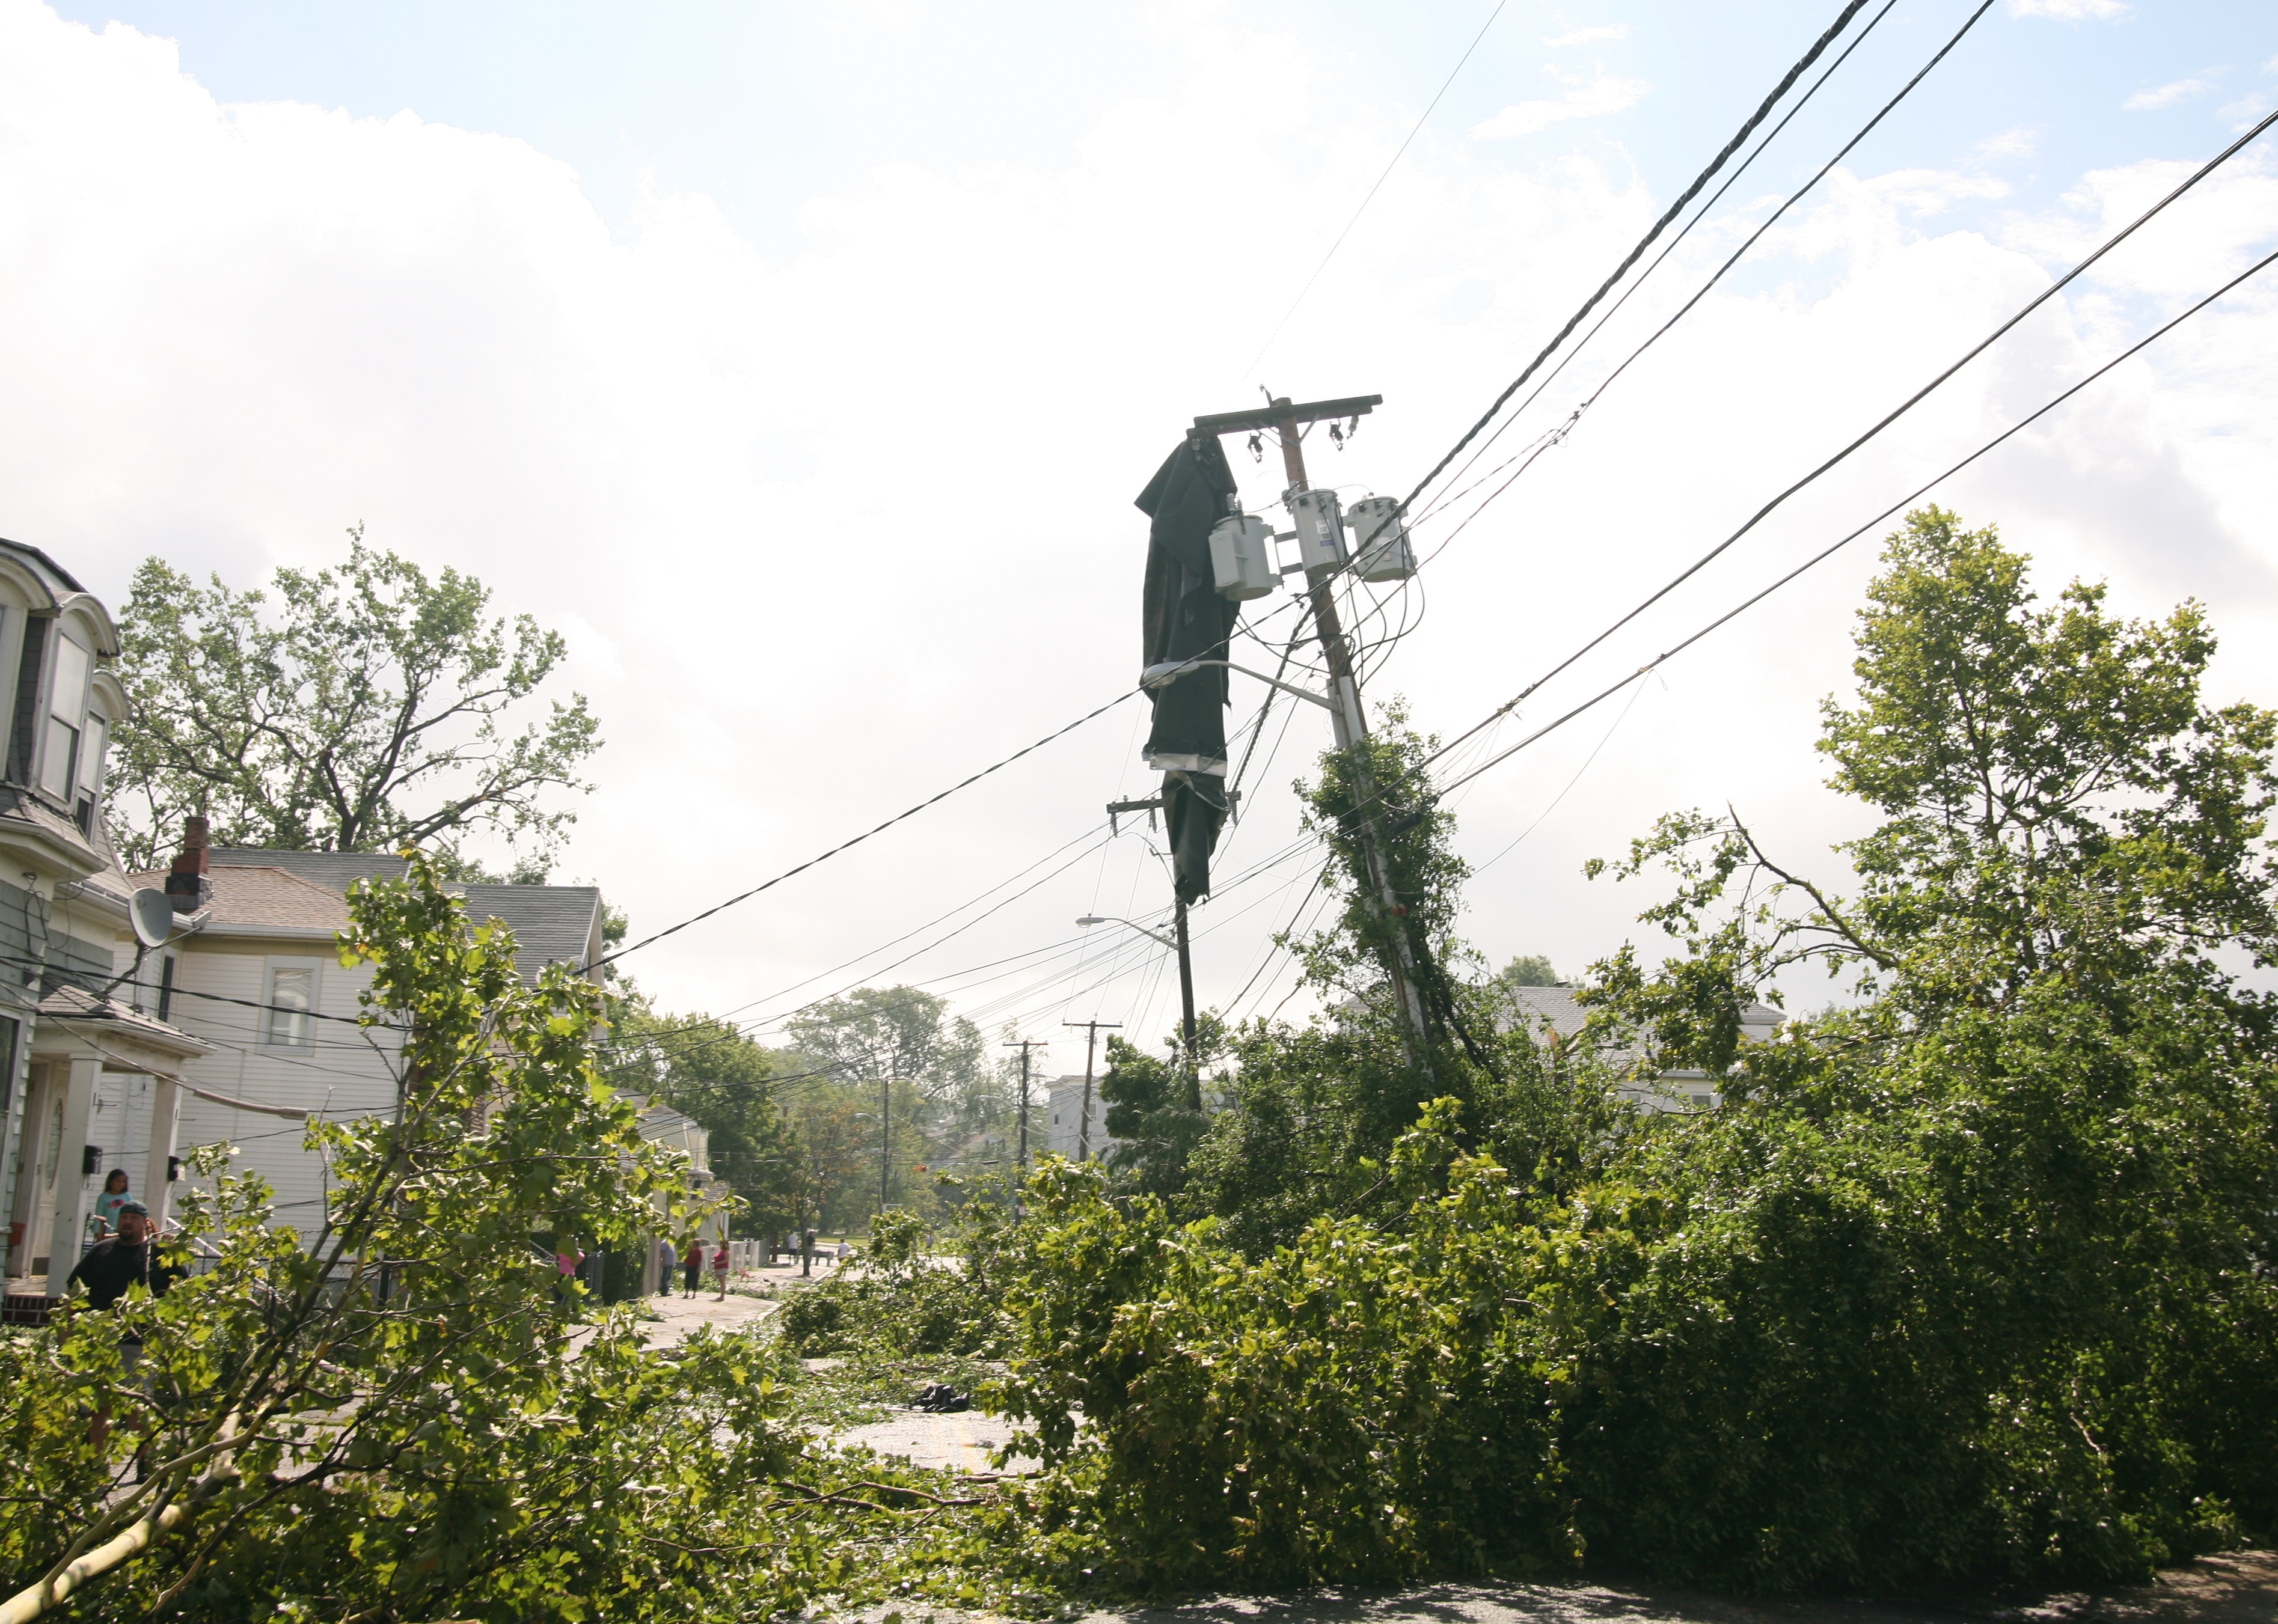 Trees made Mountain Avenue impassable and a piece of roofing material hung perilously from a pole with three electrical transformers.